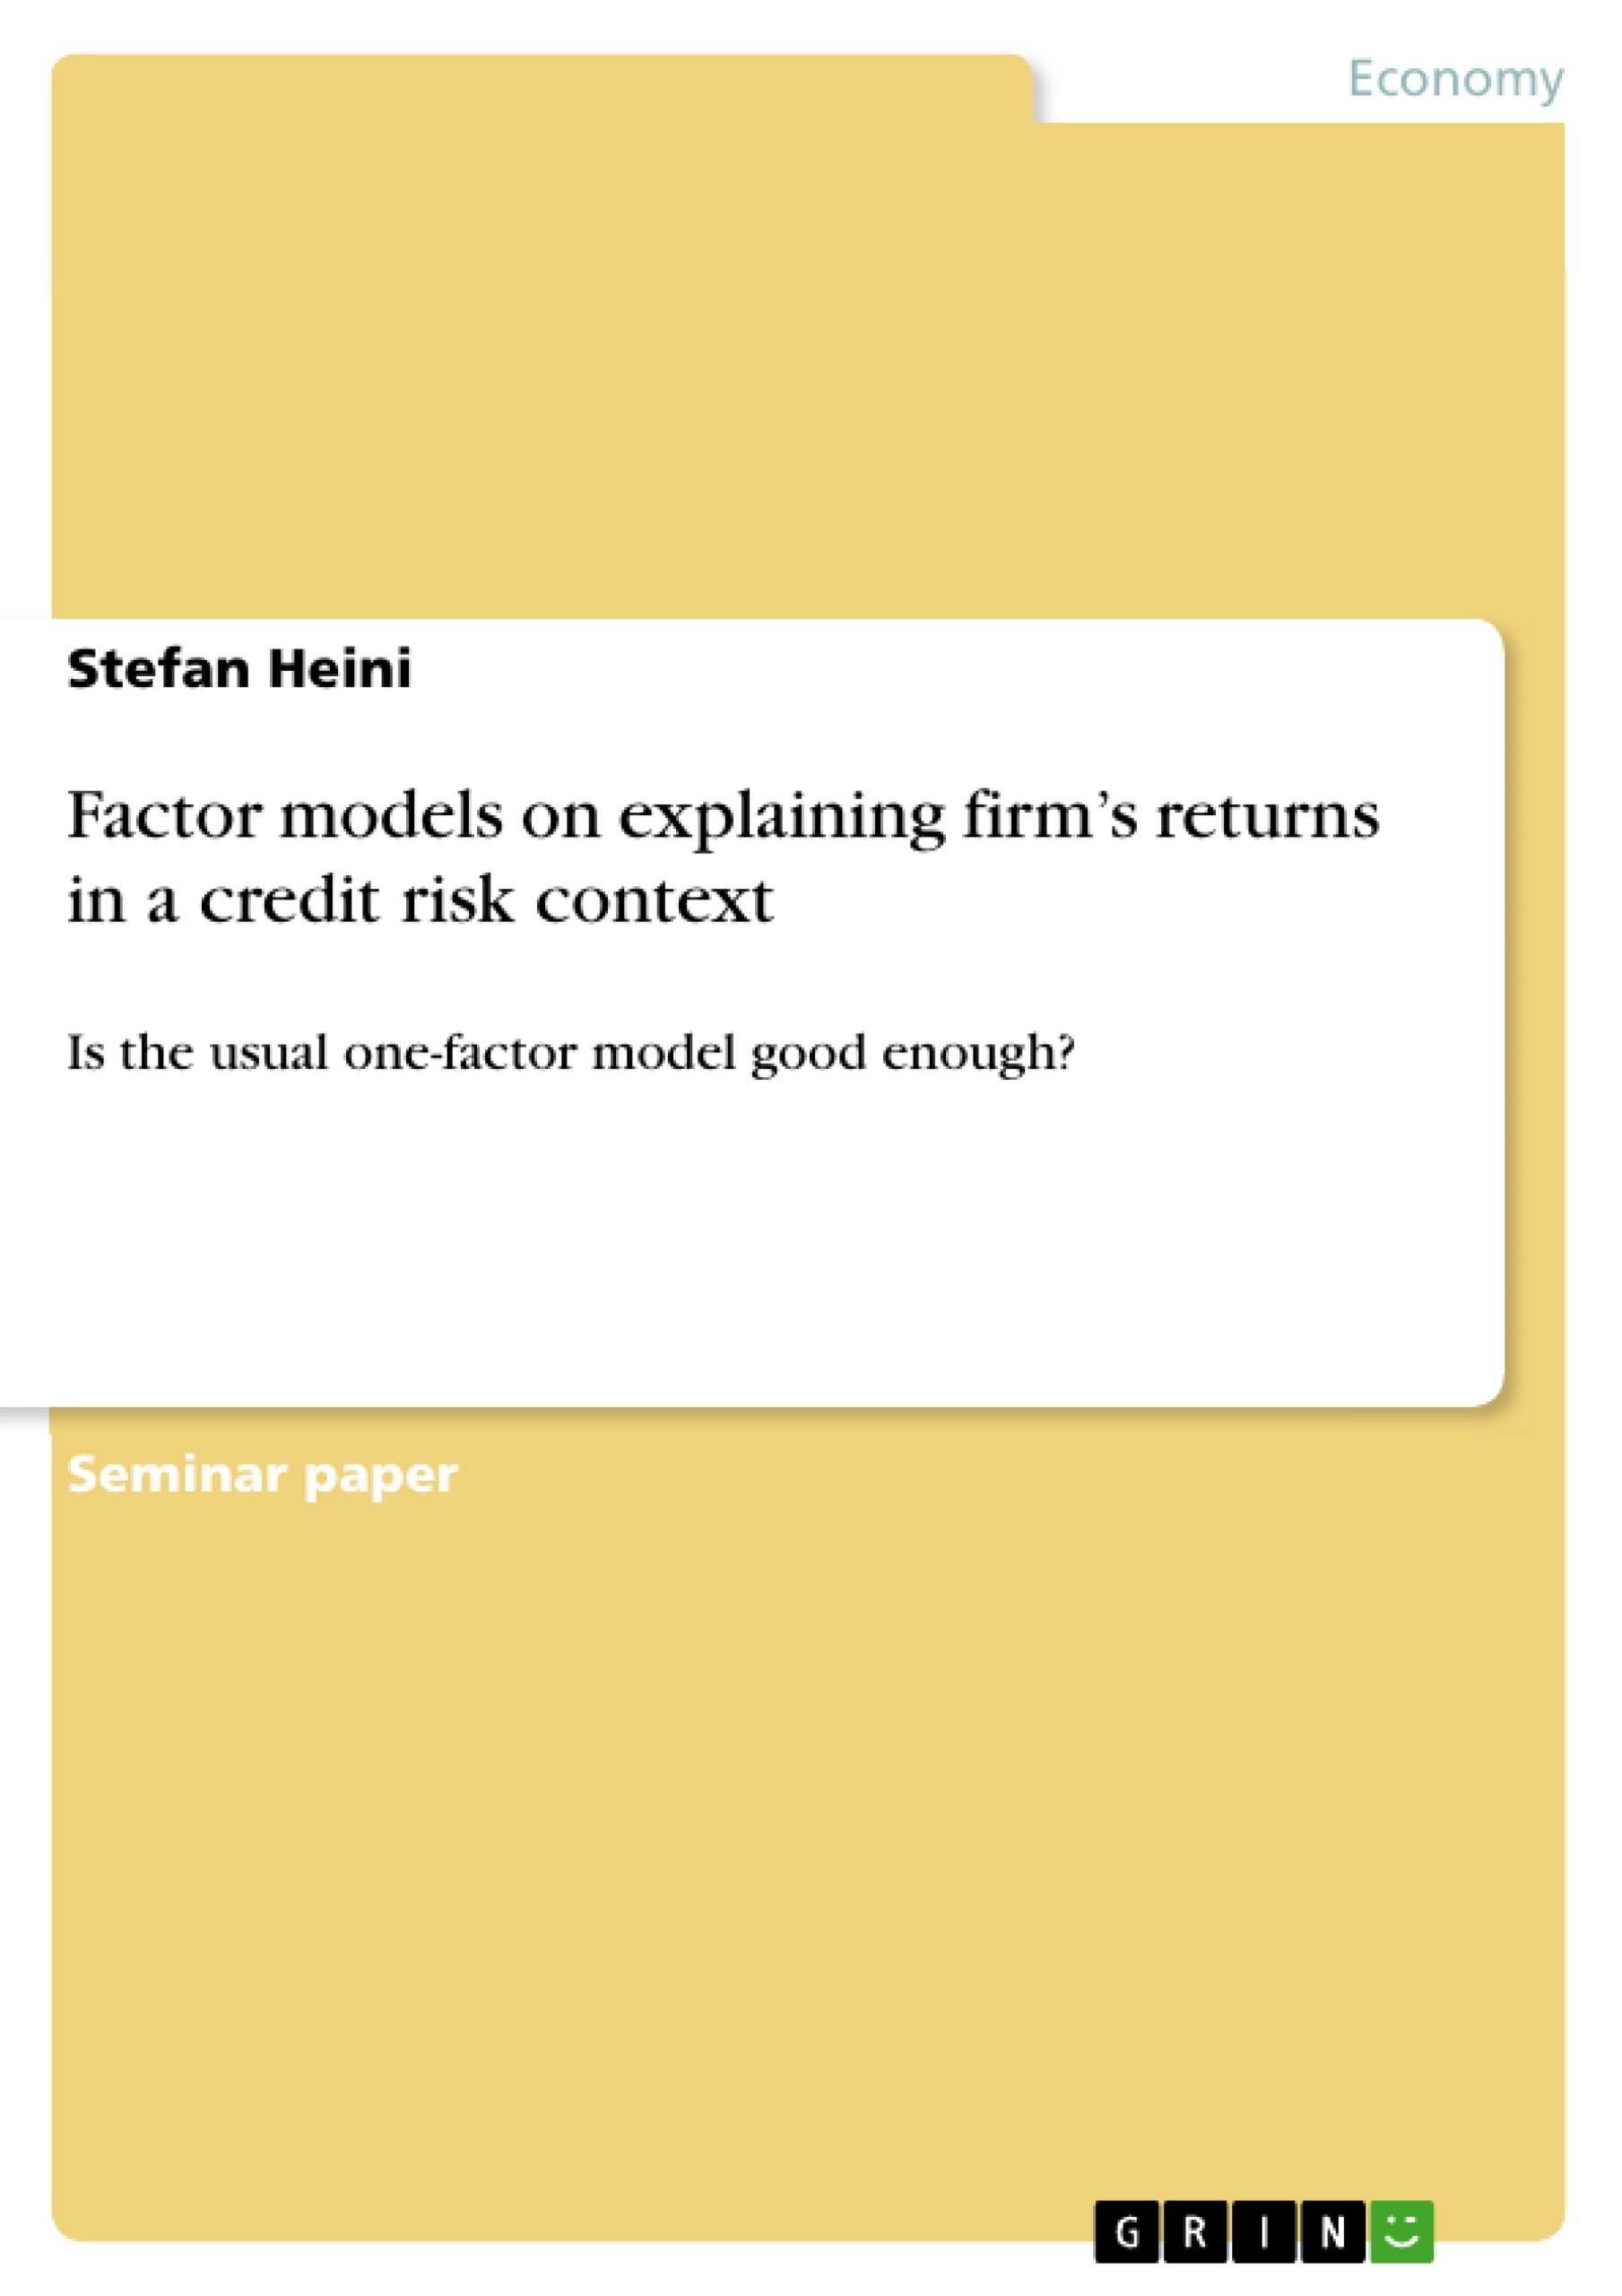 Titel: Factor models on explaining firm’s returns in a credit risk context